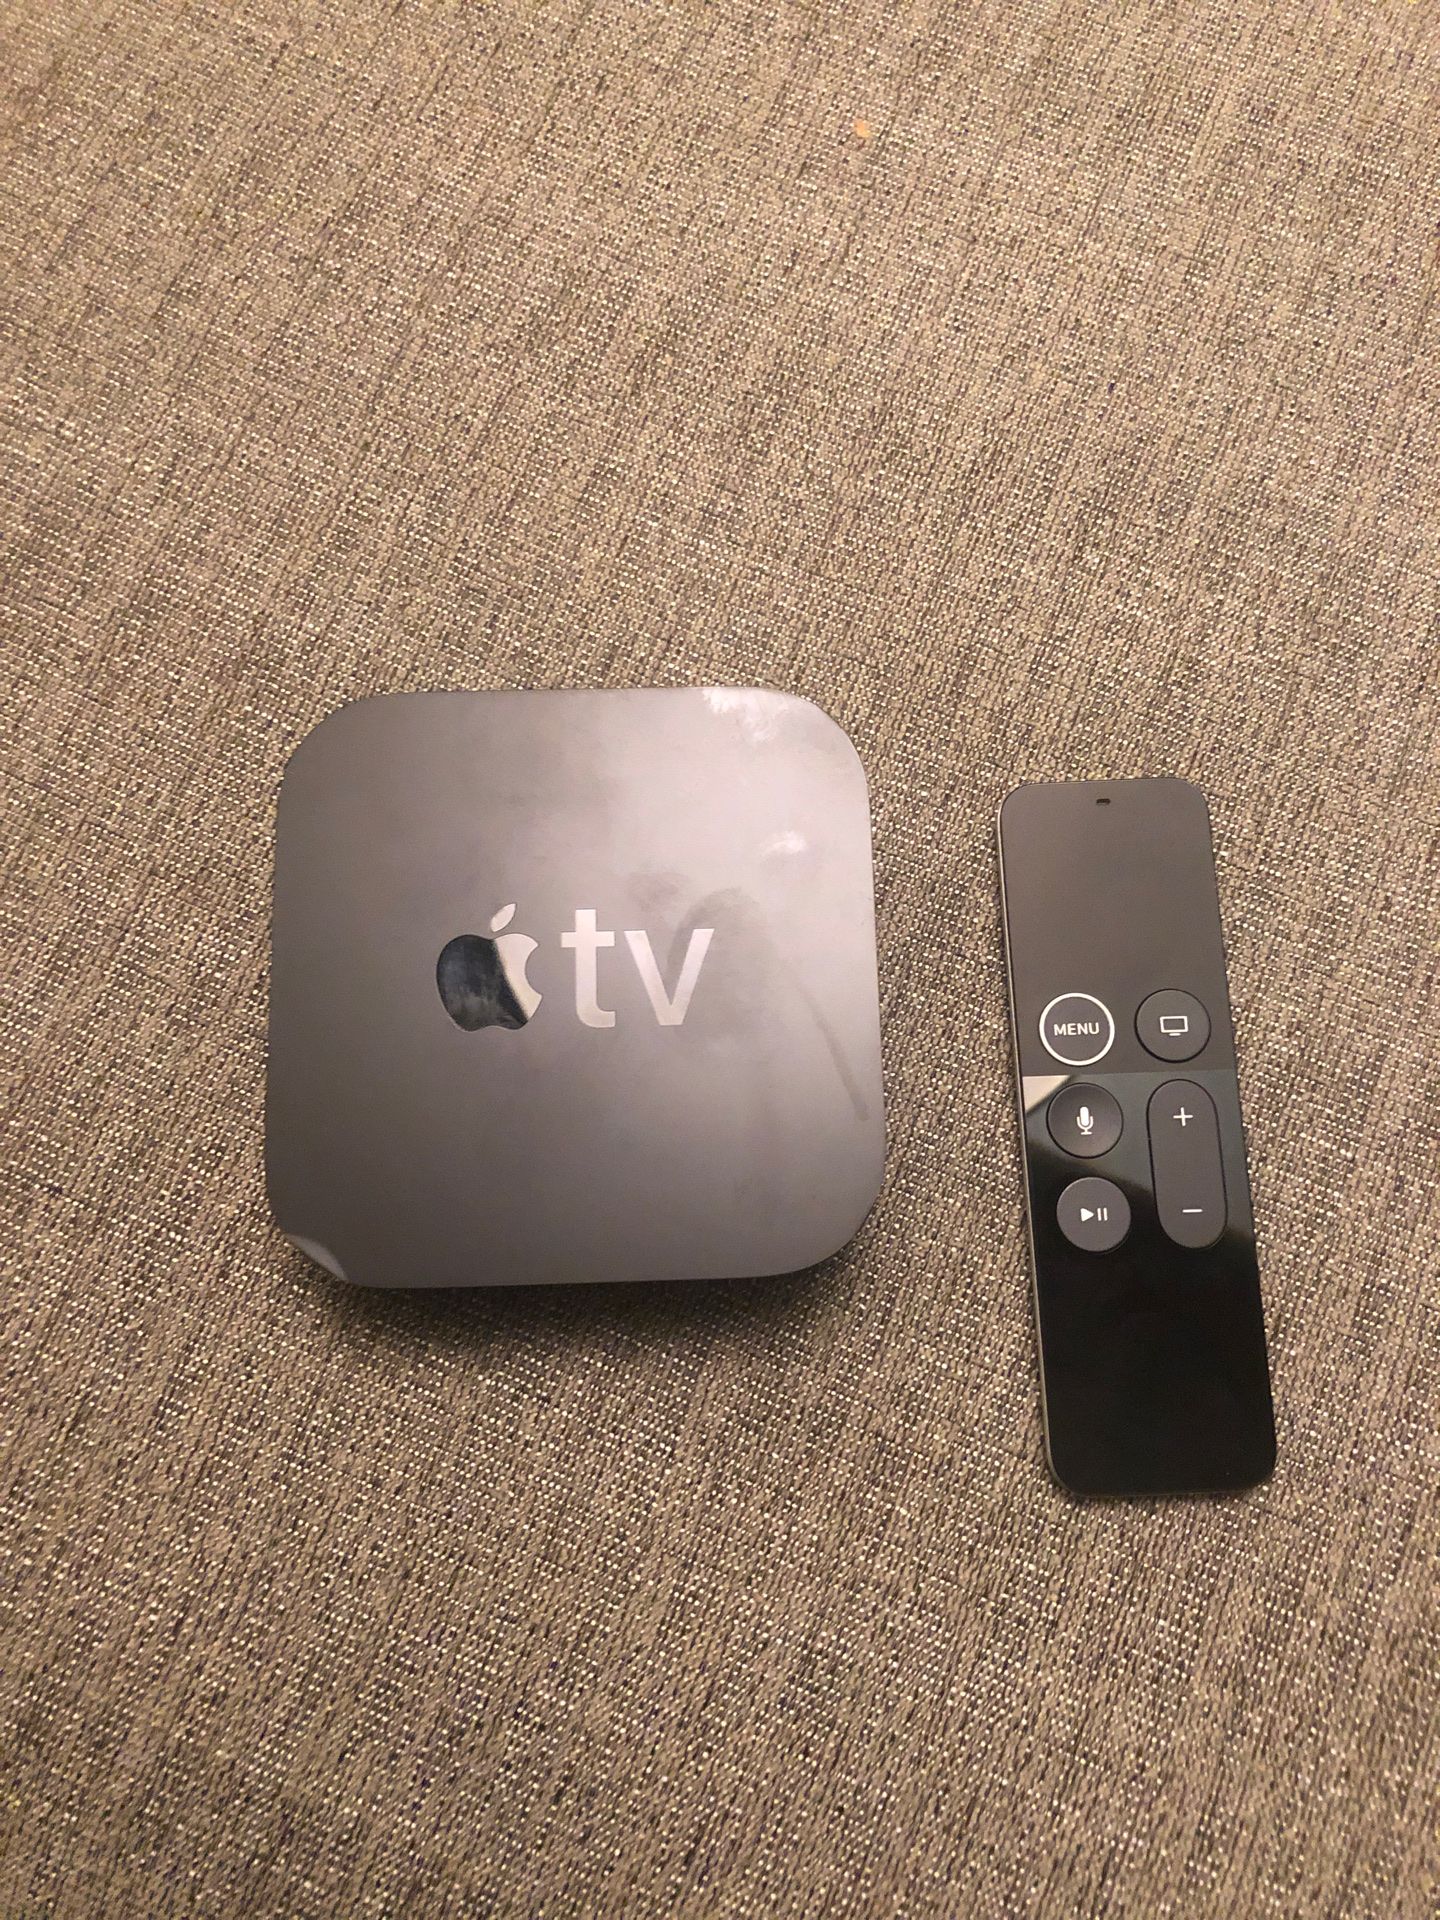 Apple TV in perfect condition 4th gen 32gb